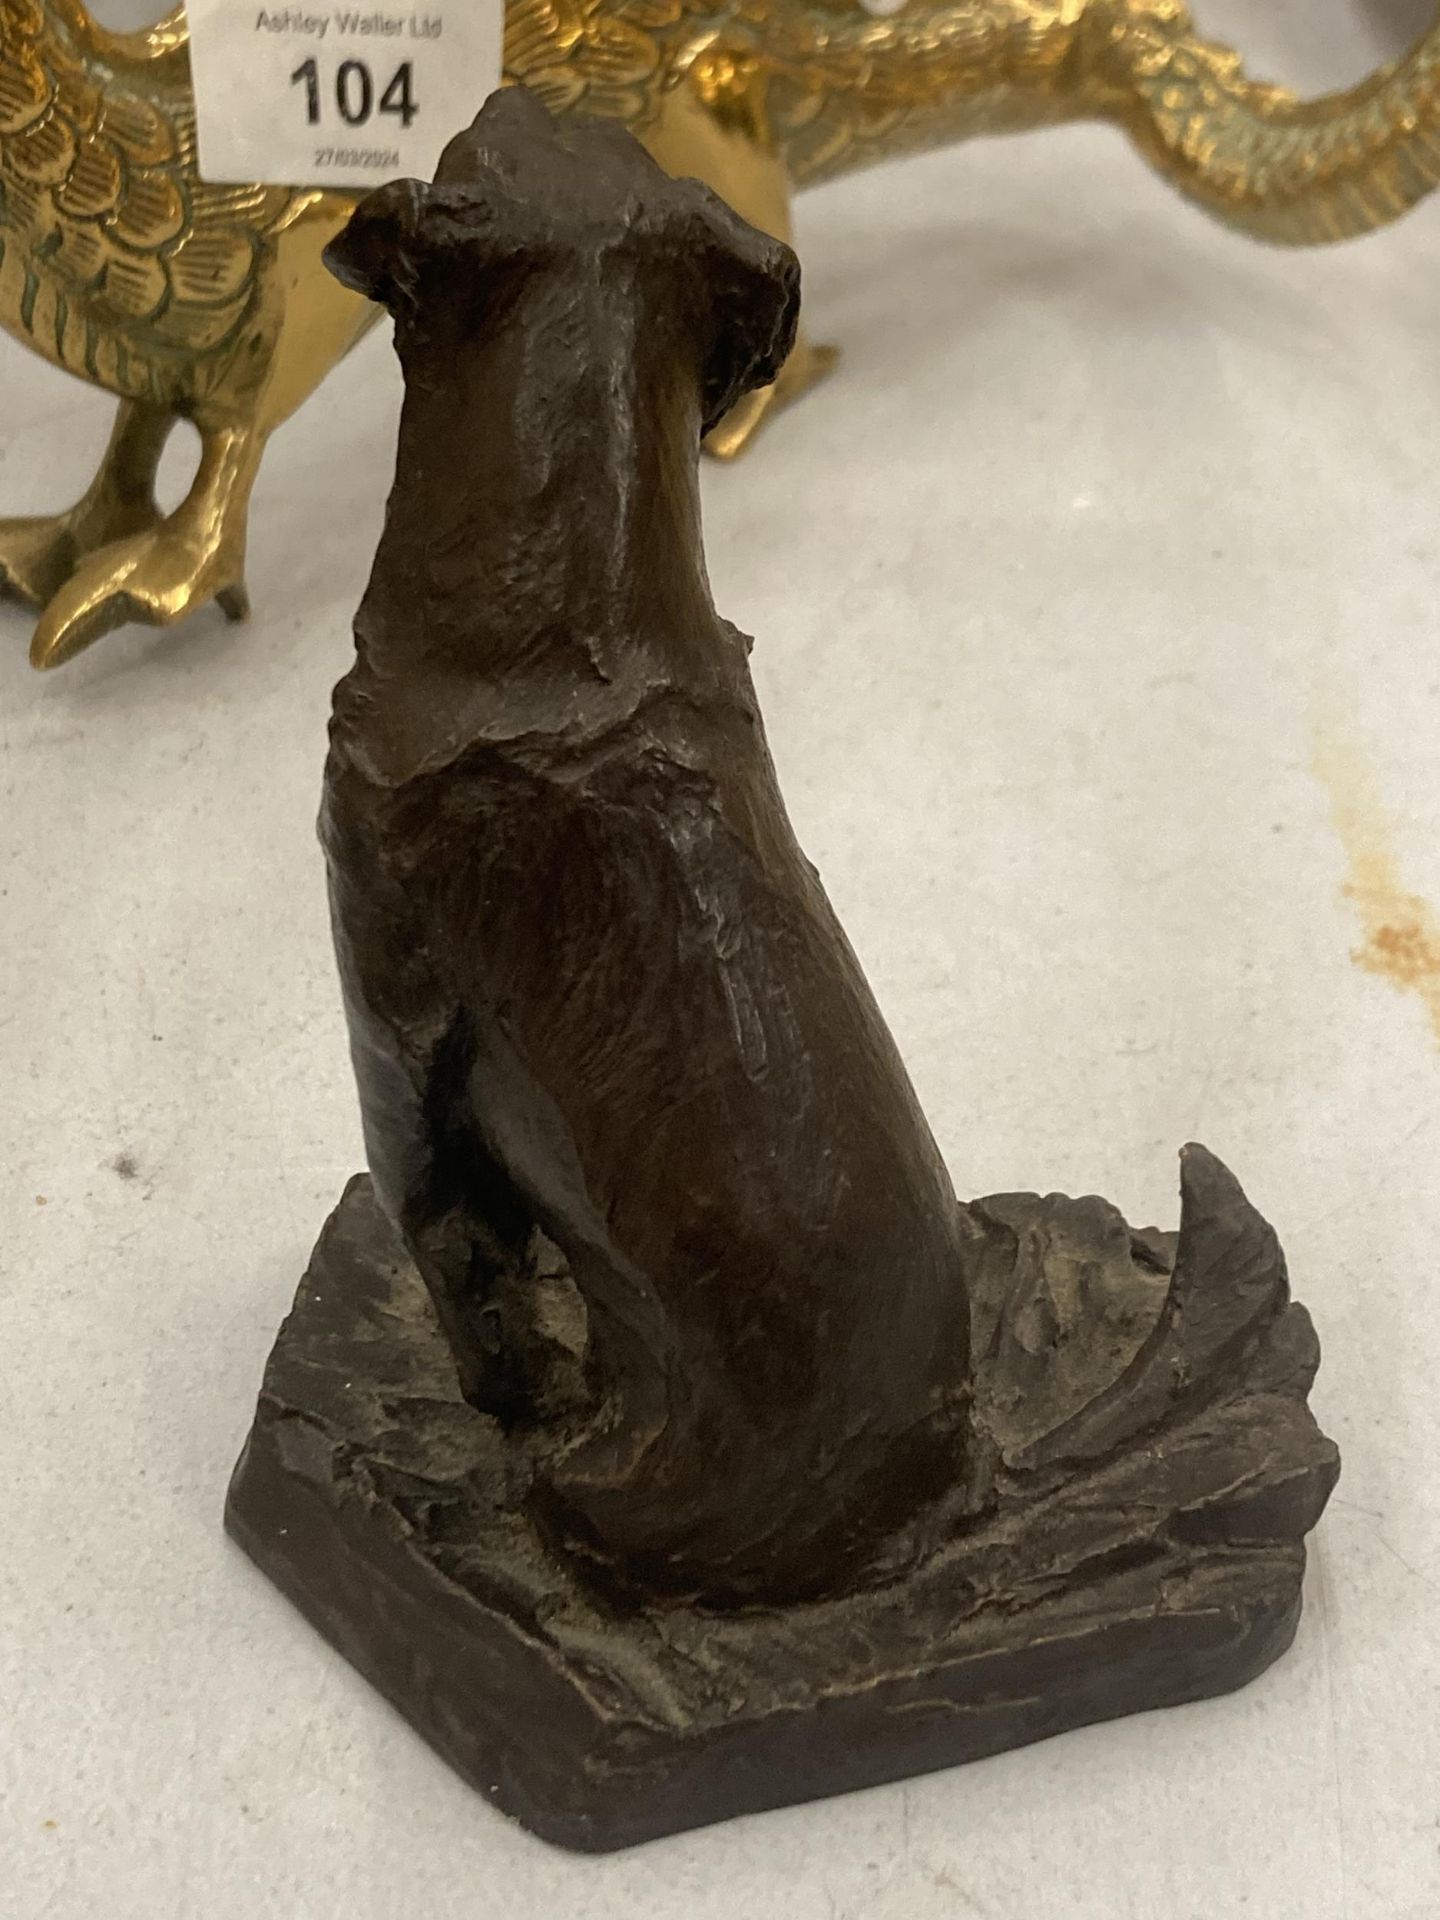 A STONE FIGURE OF A DOG WITH A BRONZED FINISH, HEIGHT 10CM - Image 3 of 4